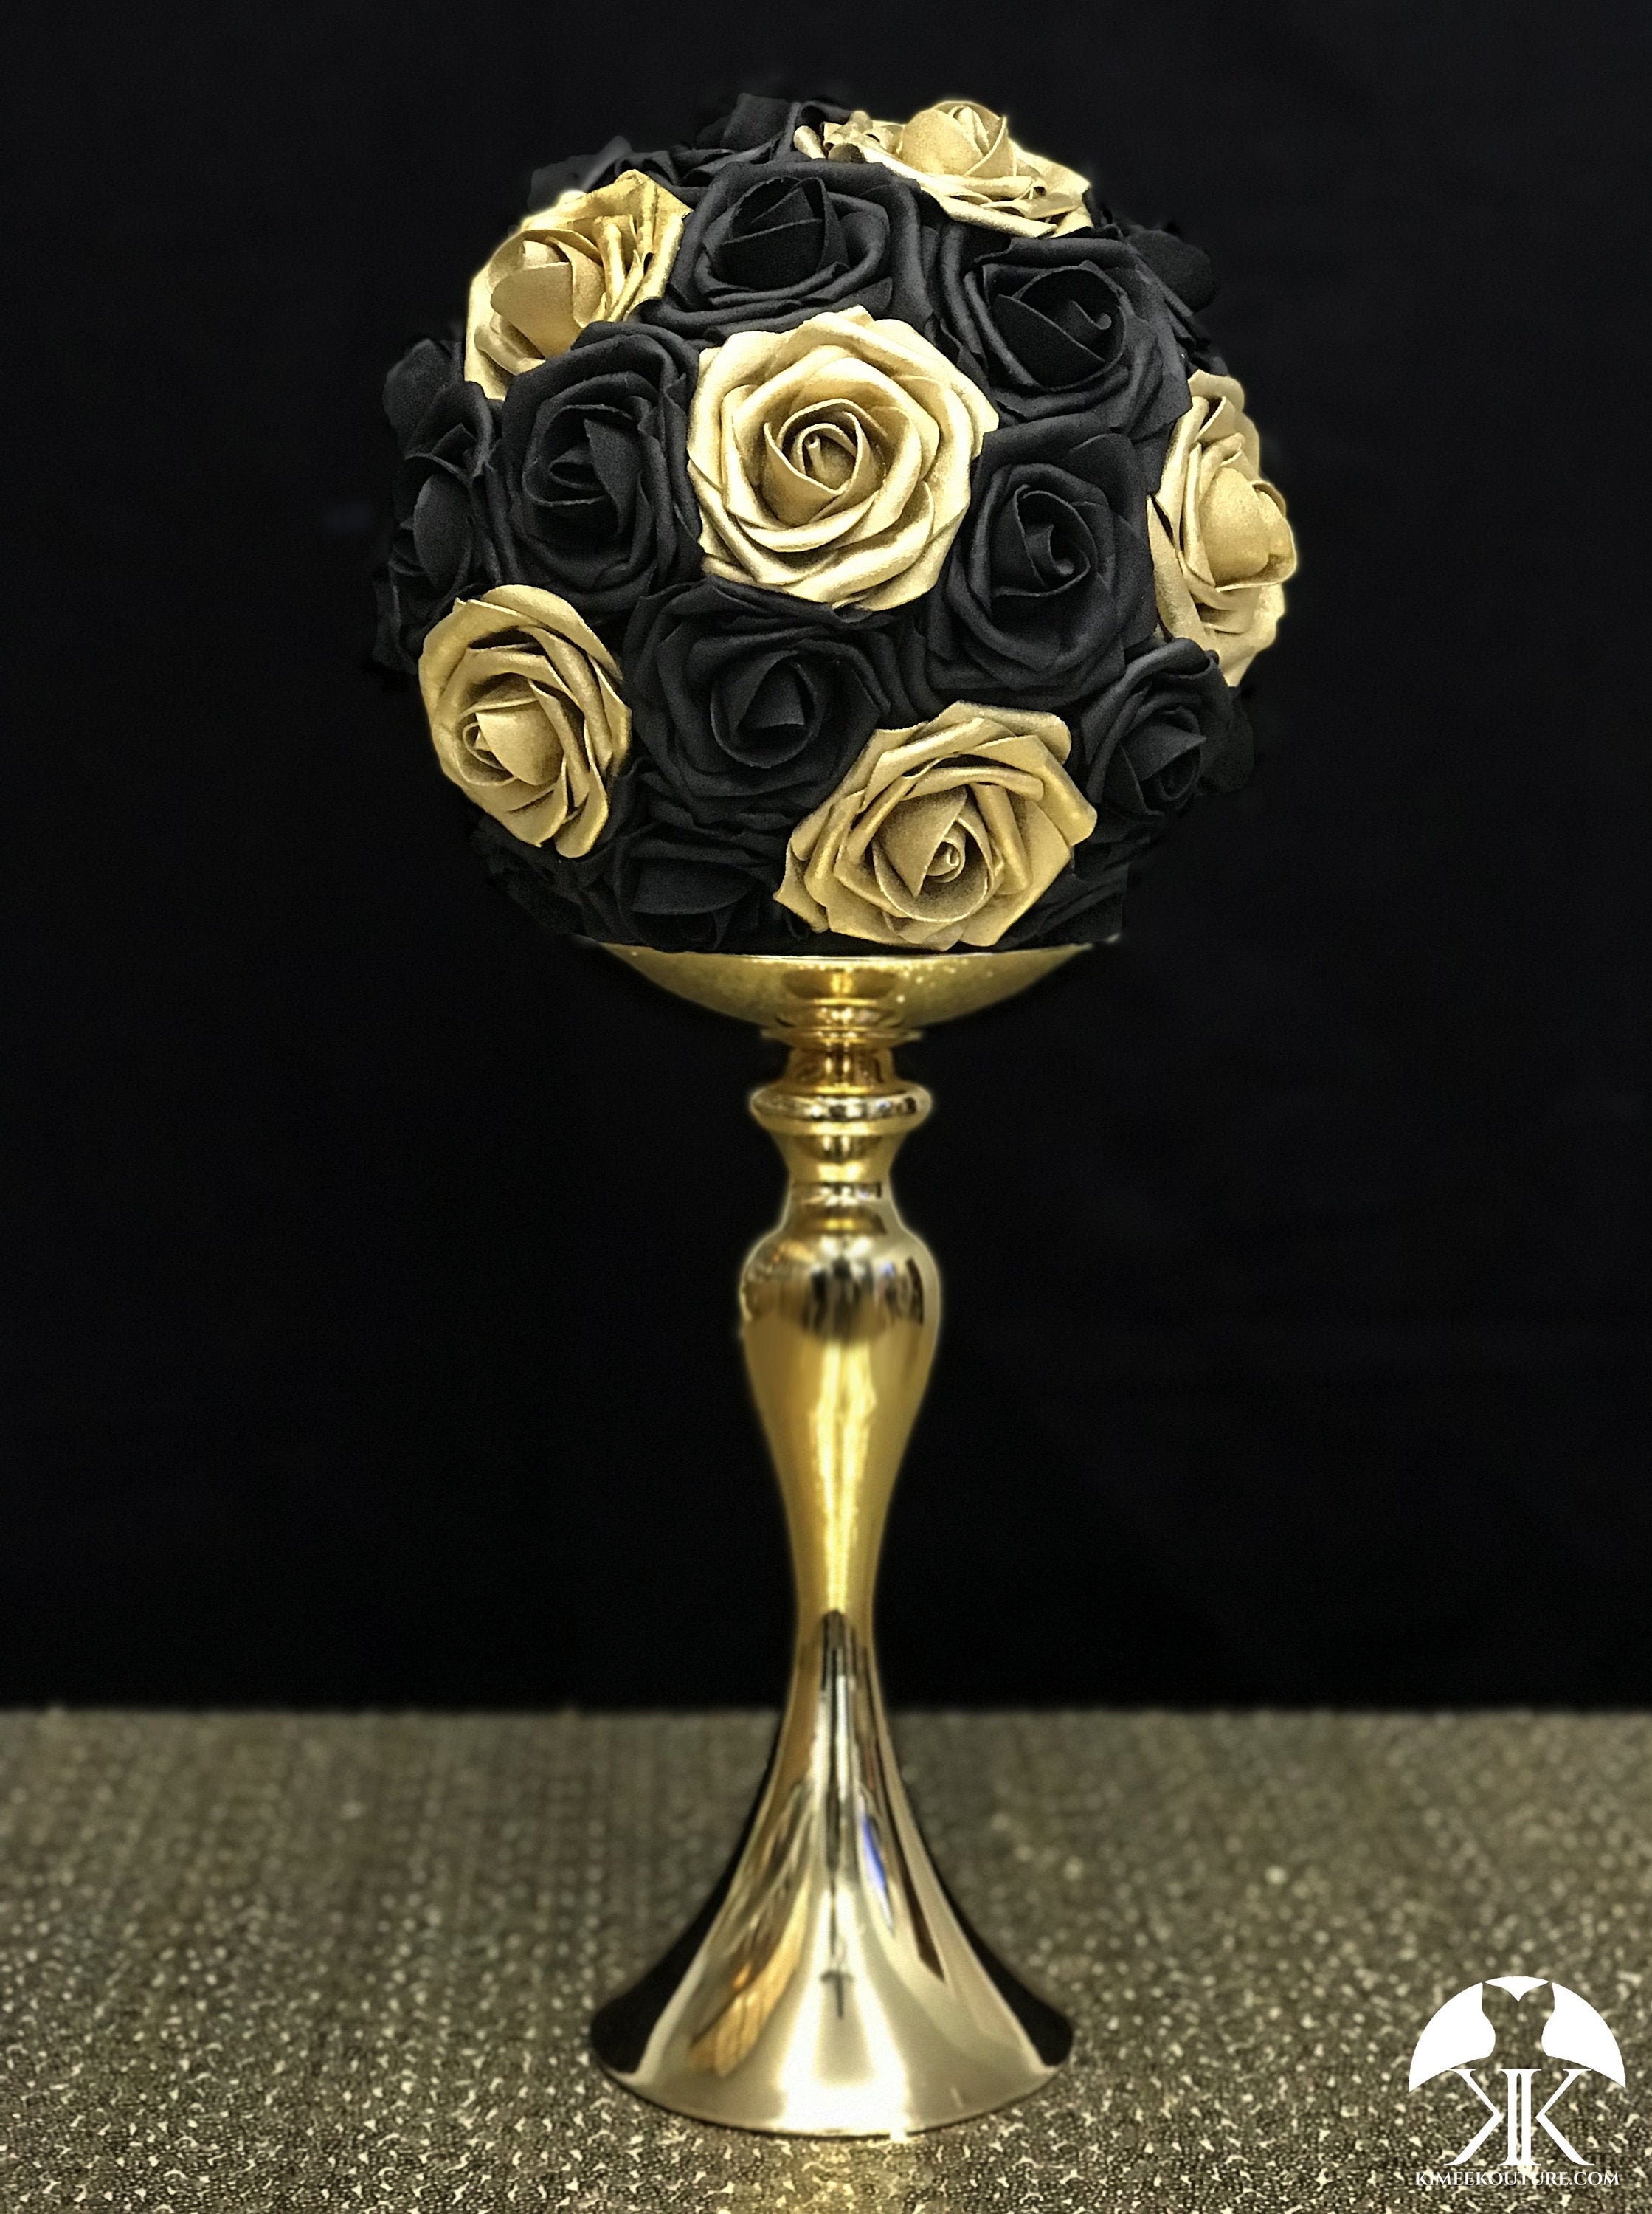 Black Rose and Gold Rose Centerpieces Mirrored Mason Jars, Bud